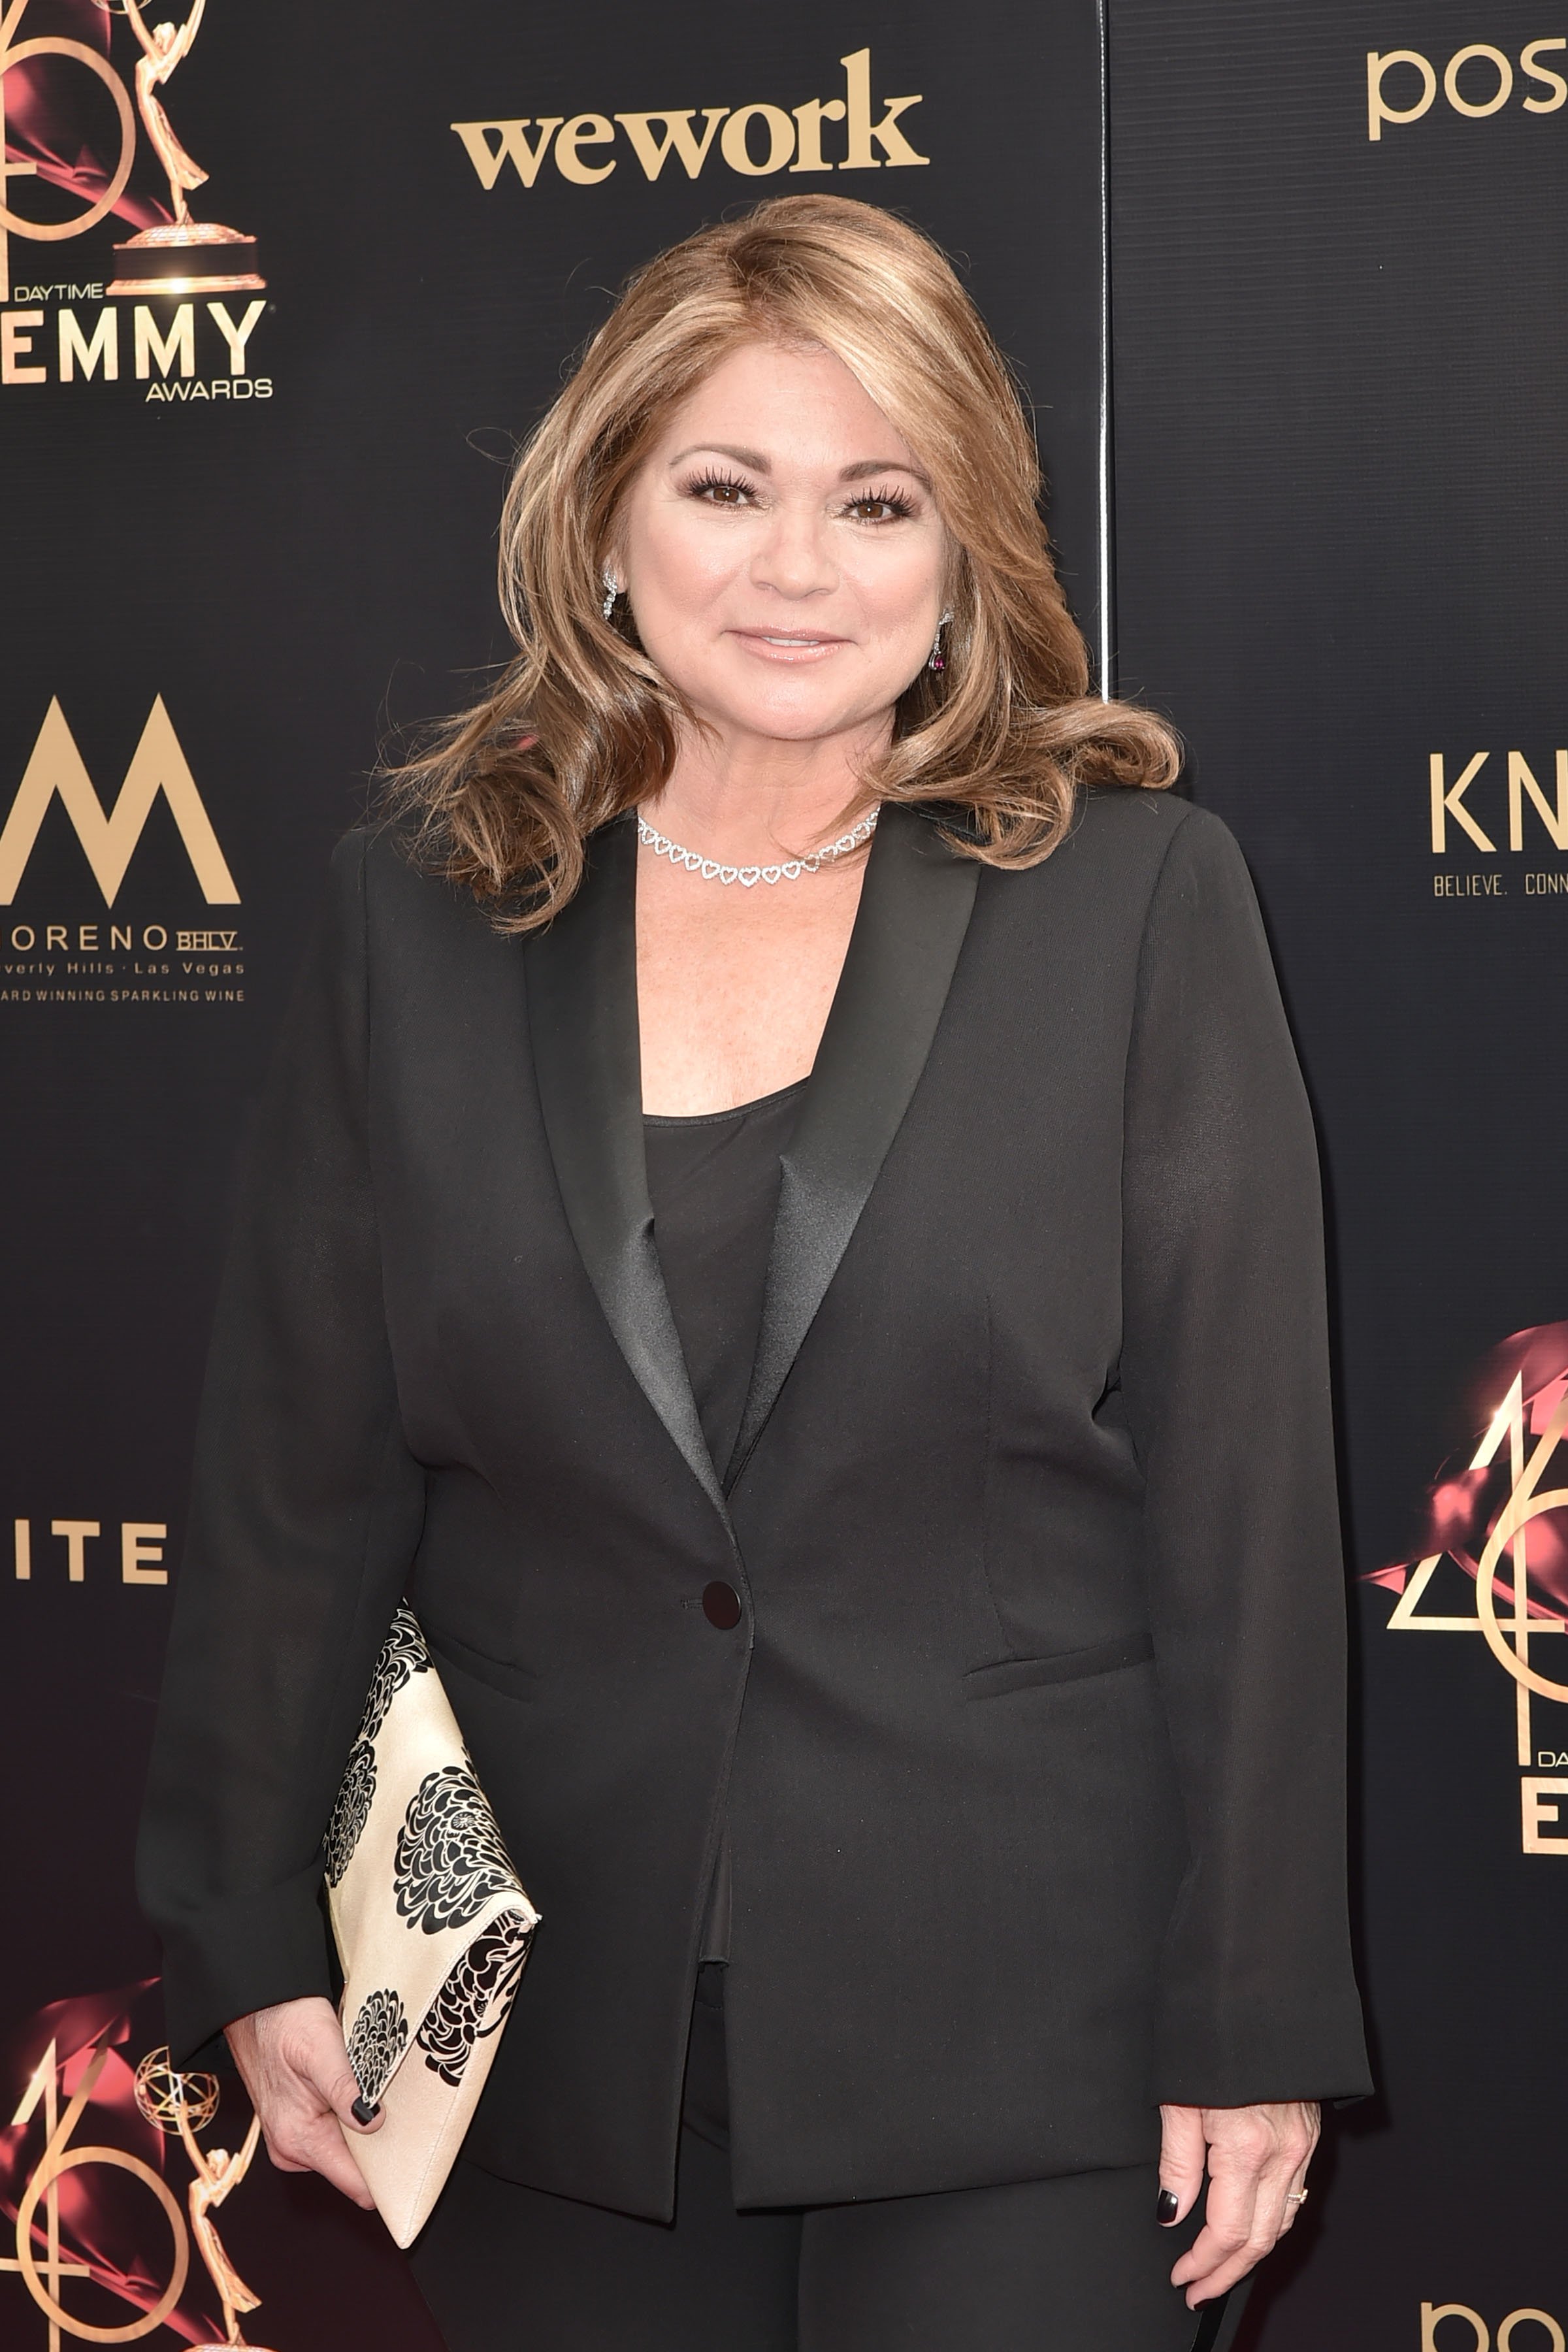 Valerie Bertinelli attends the 46th annual Daytime Emmy Awards at Pasadena Civic Center on May 05, 2019, in Pasadena, California. | Source: Getty Images